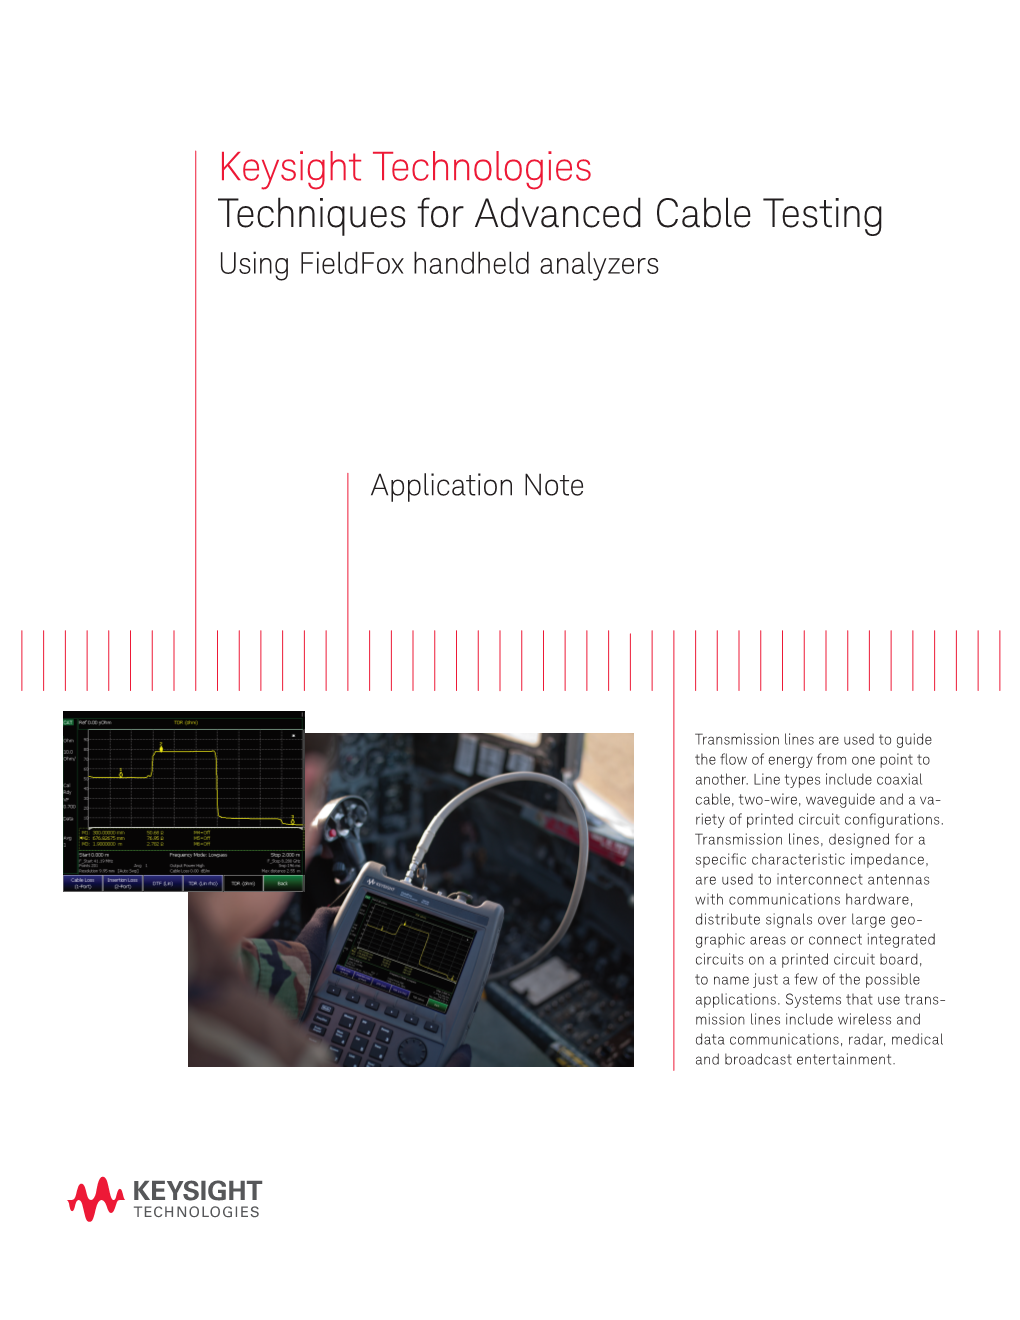 Techniques for Advanced Cable Testing Using Fieldfox Handheld Analyzers